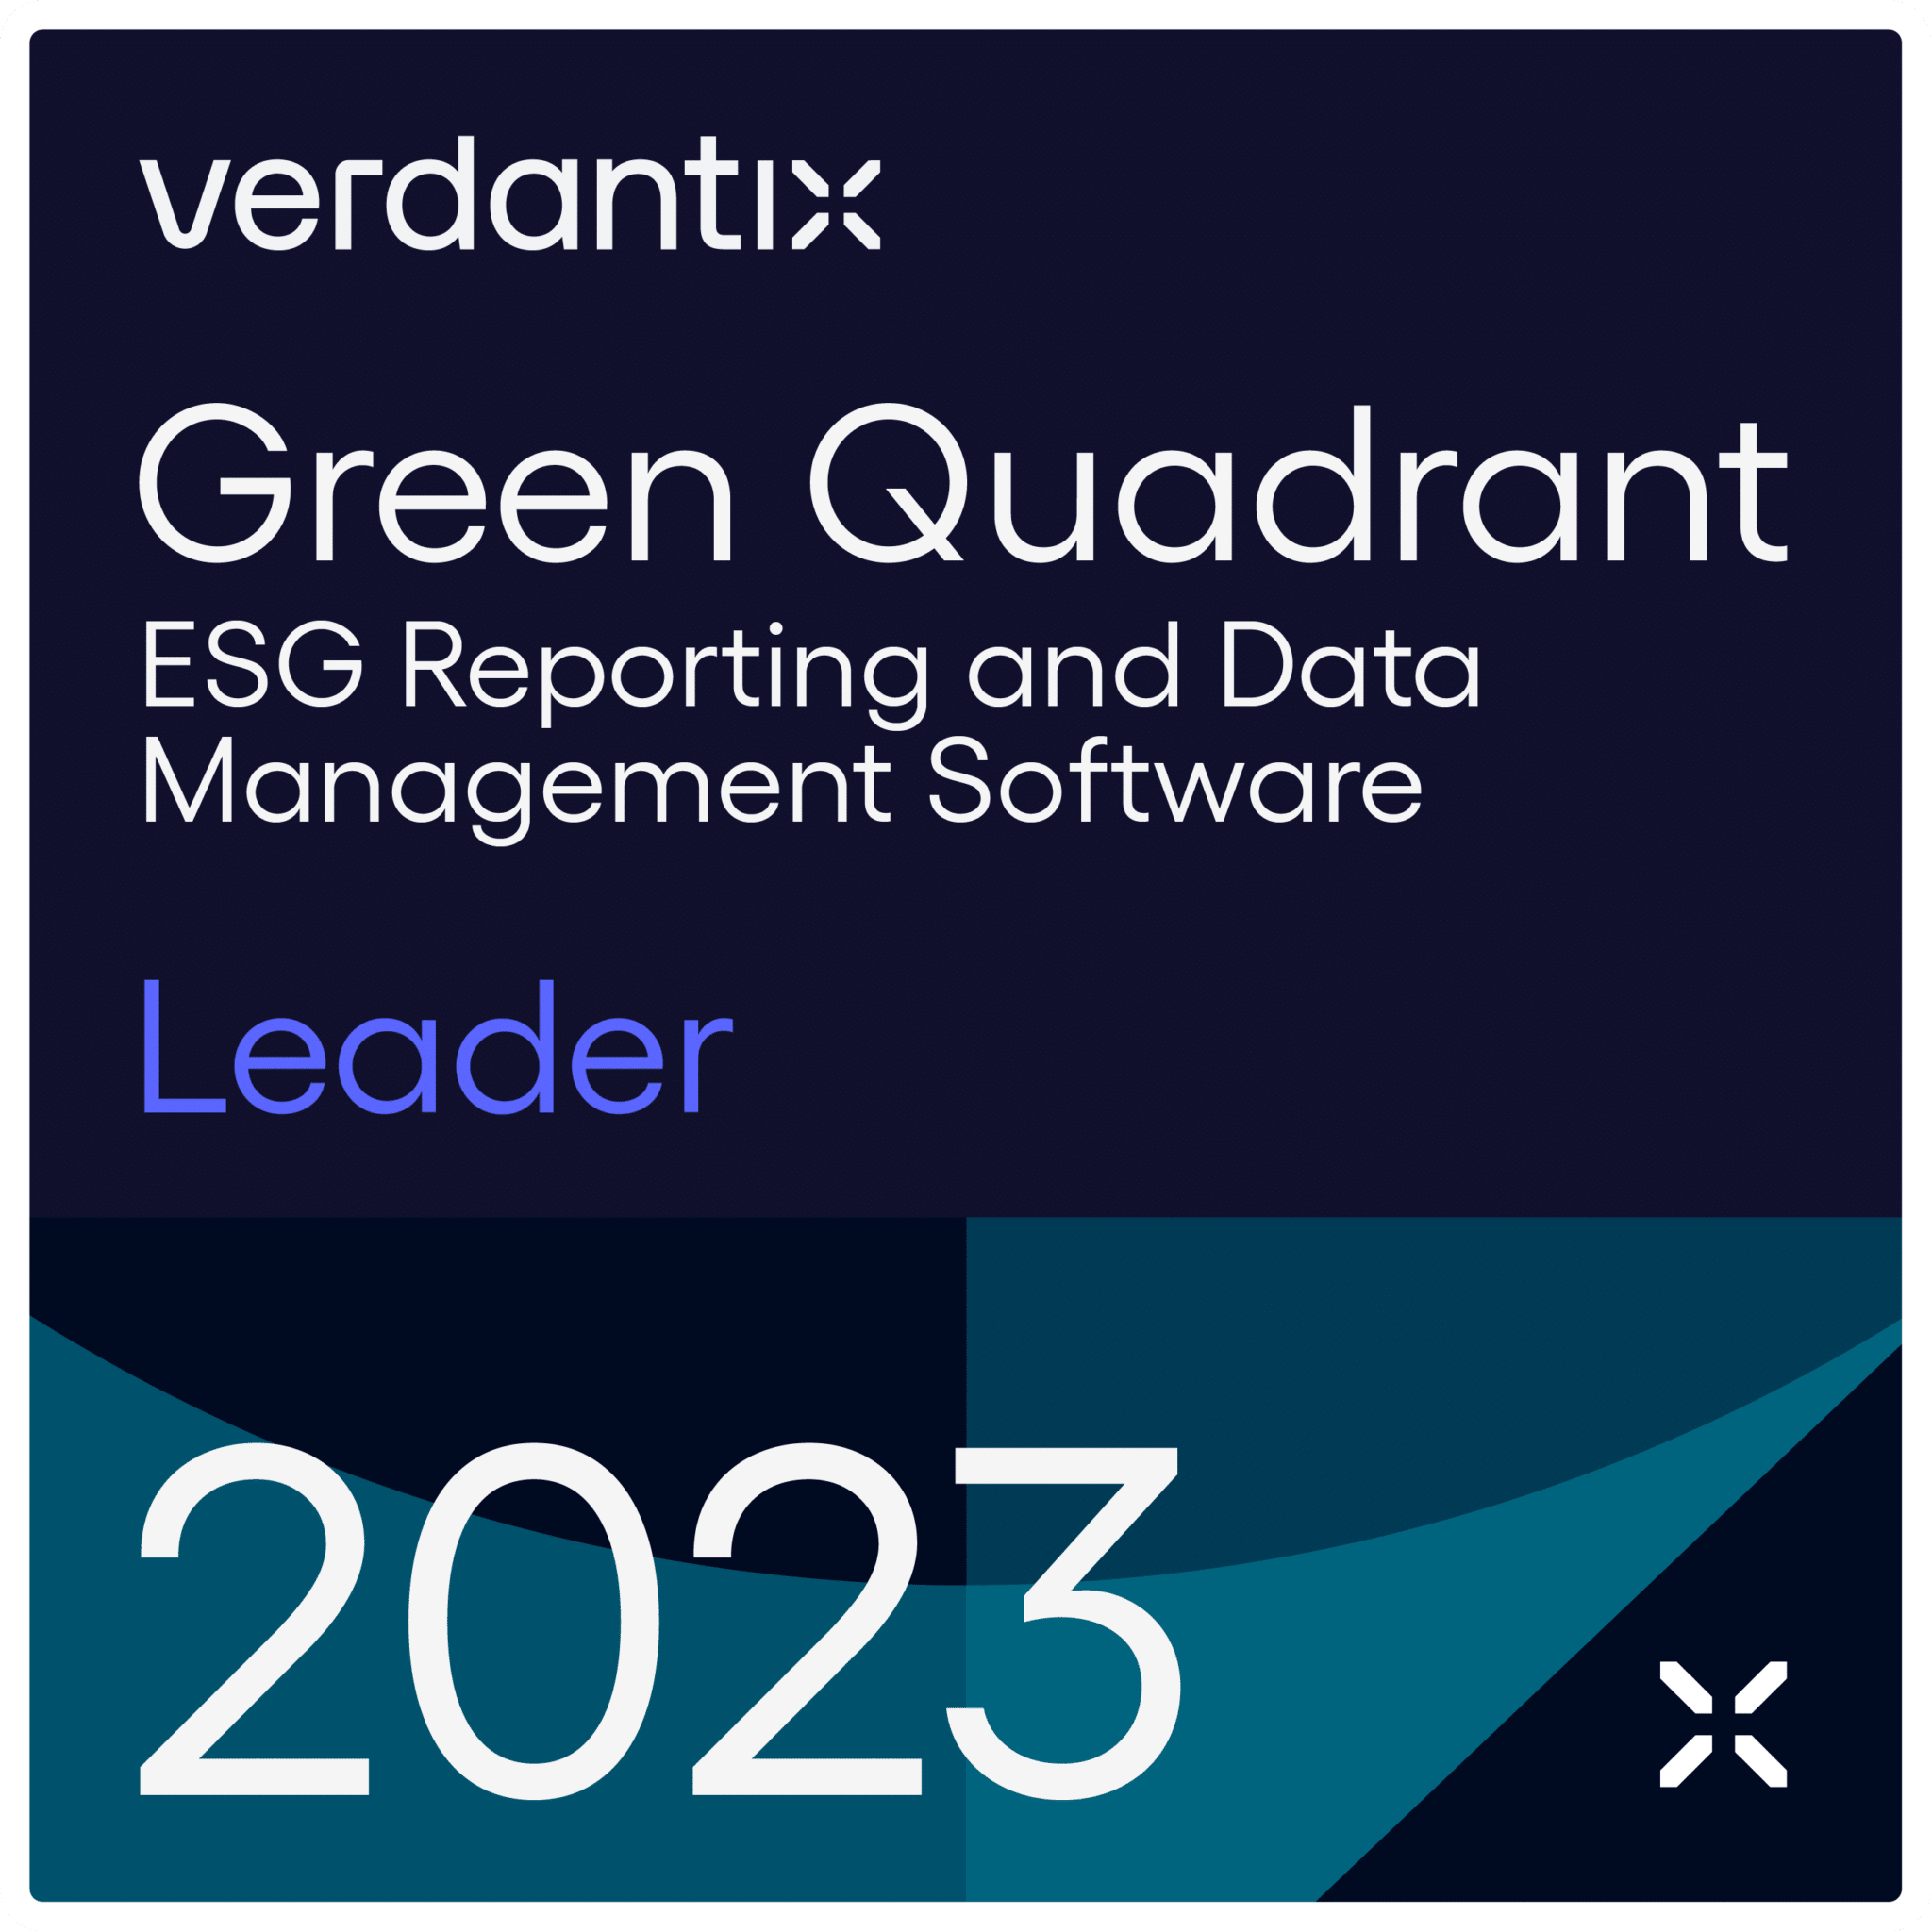 Benchmark Gensuite® Named as a Leader in Green Quadrant for ESG Reporting and Data Management Software 